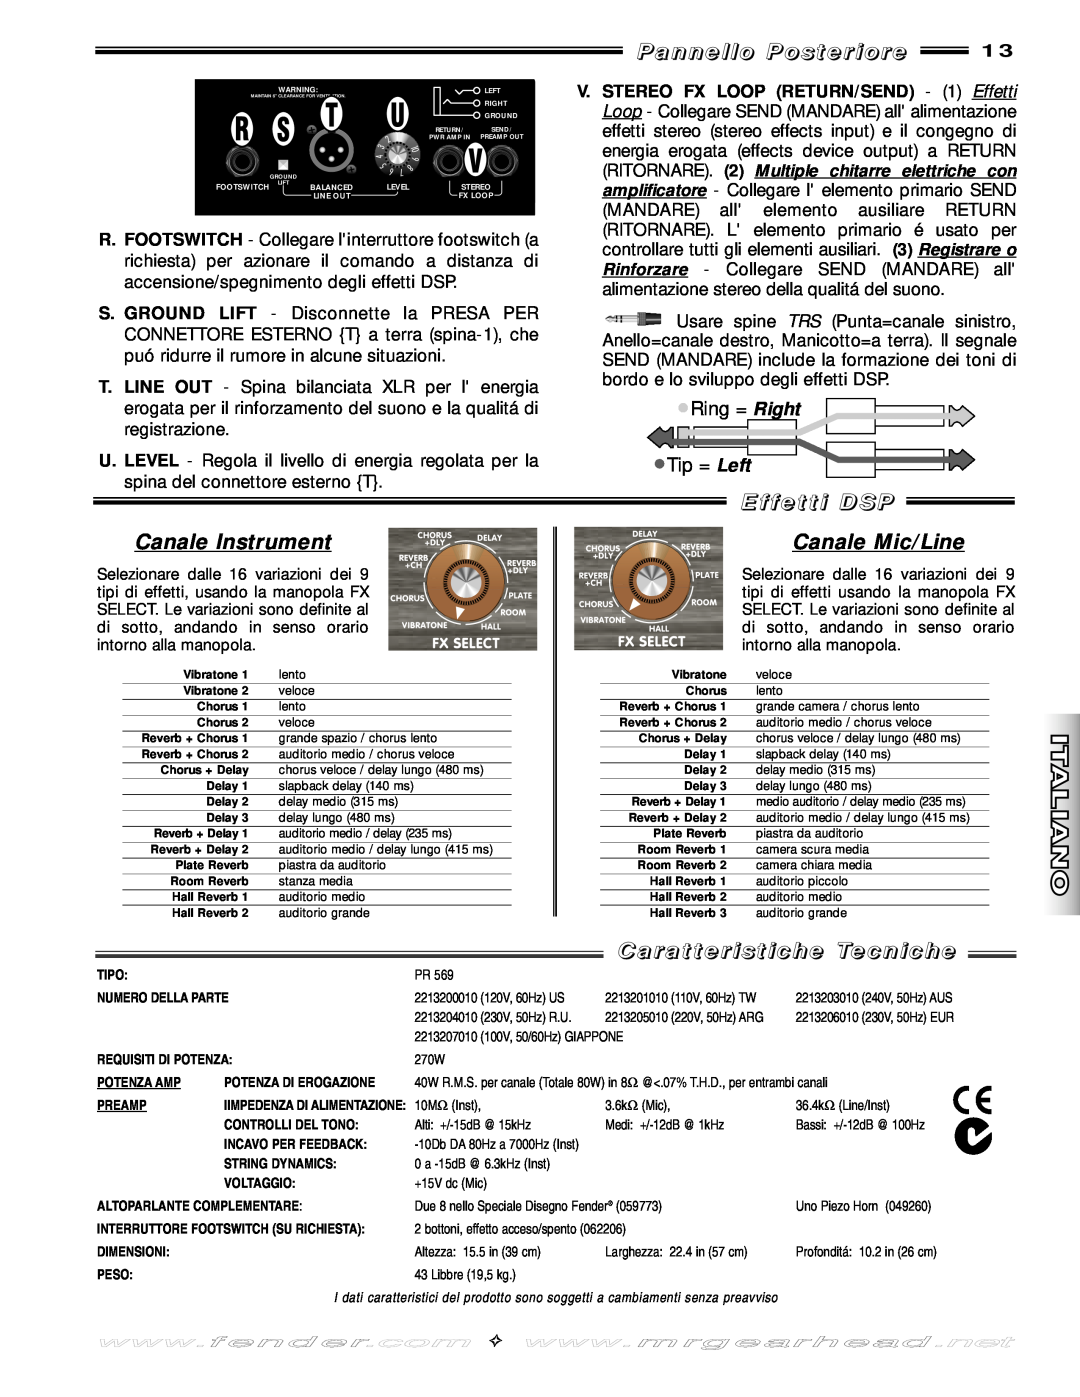 Fender Stereo Amplifier manual P a n n e l l o P o s t e r i o re, Canale Instrument, E ff e t t i D S P, Canale Mic/Line 